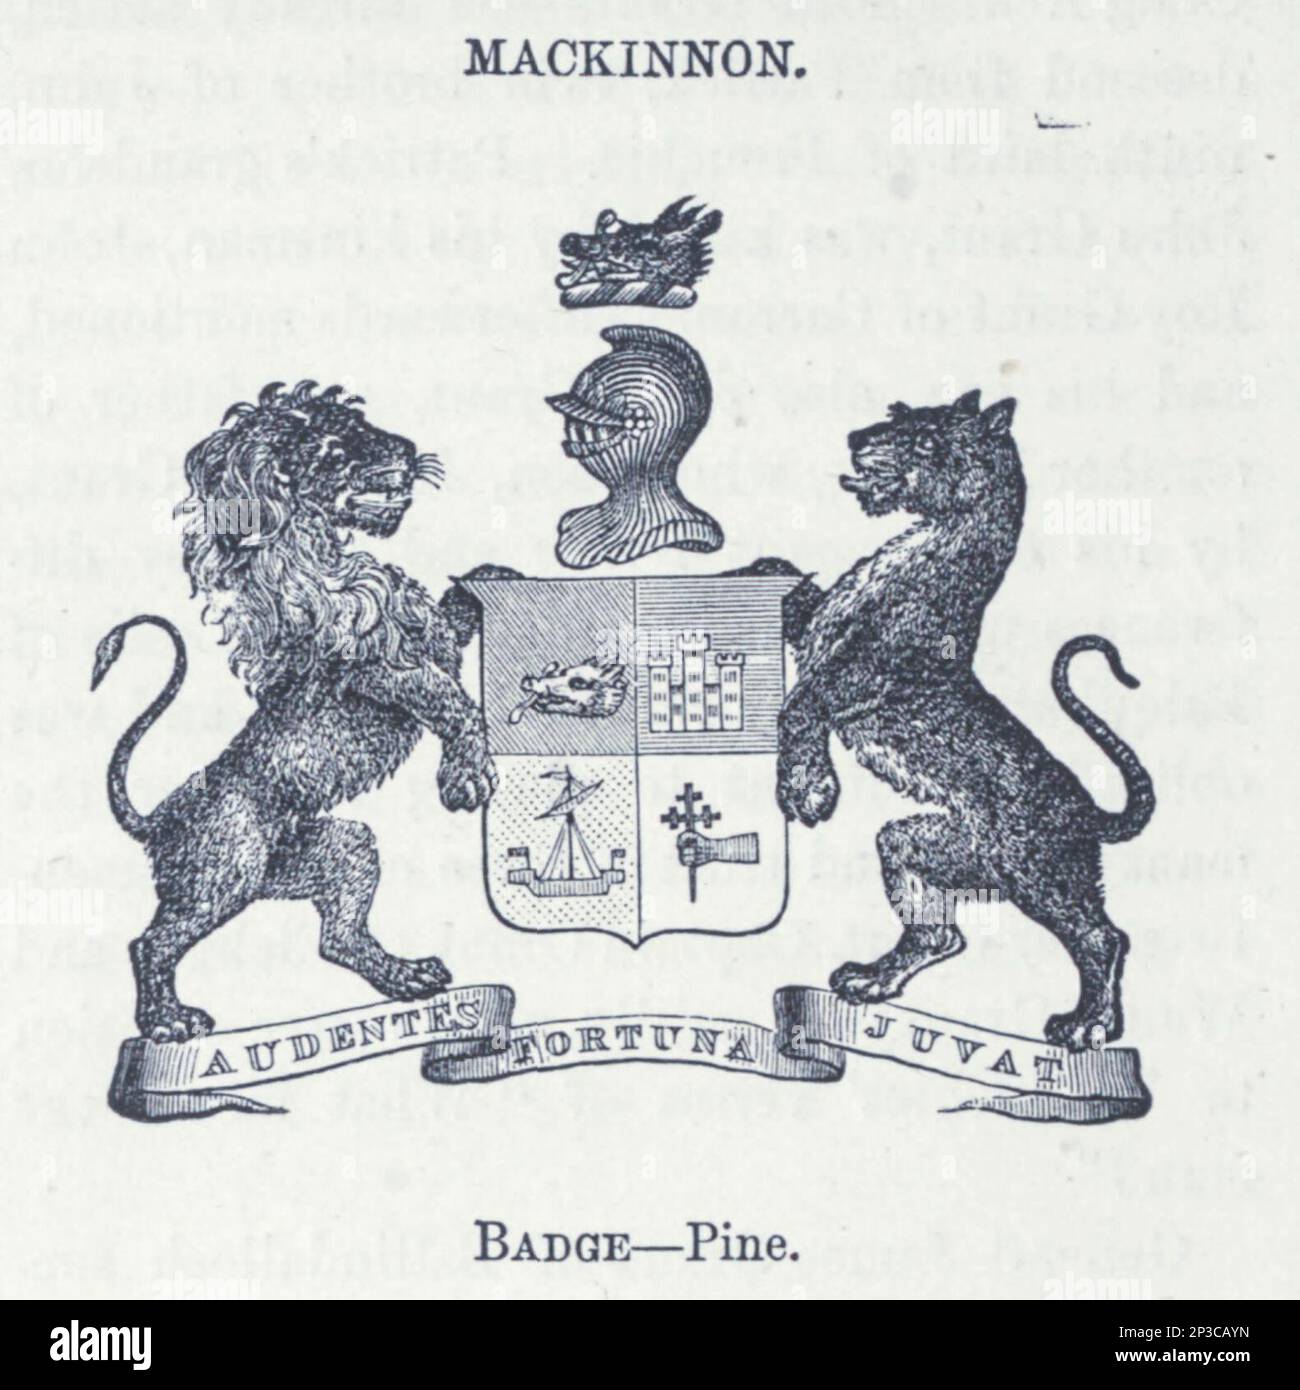 Mackinnon coat of arms, crest, and motto from the book ' A history of the Scottish Highlands, Highland clans and Highland regiments ' Volume 2 by Maclauchlan, Thomas, 1816-1886; Wilson, John, 1785-1854; Keltie, John Scott, Sir, 1840-1927 Publication date 1875 publisher Edinburgh ; London : A. Fullarton Stock Photo